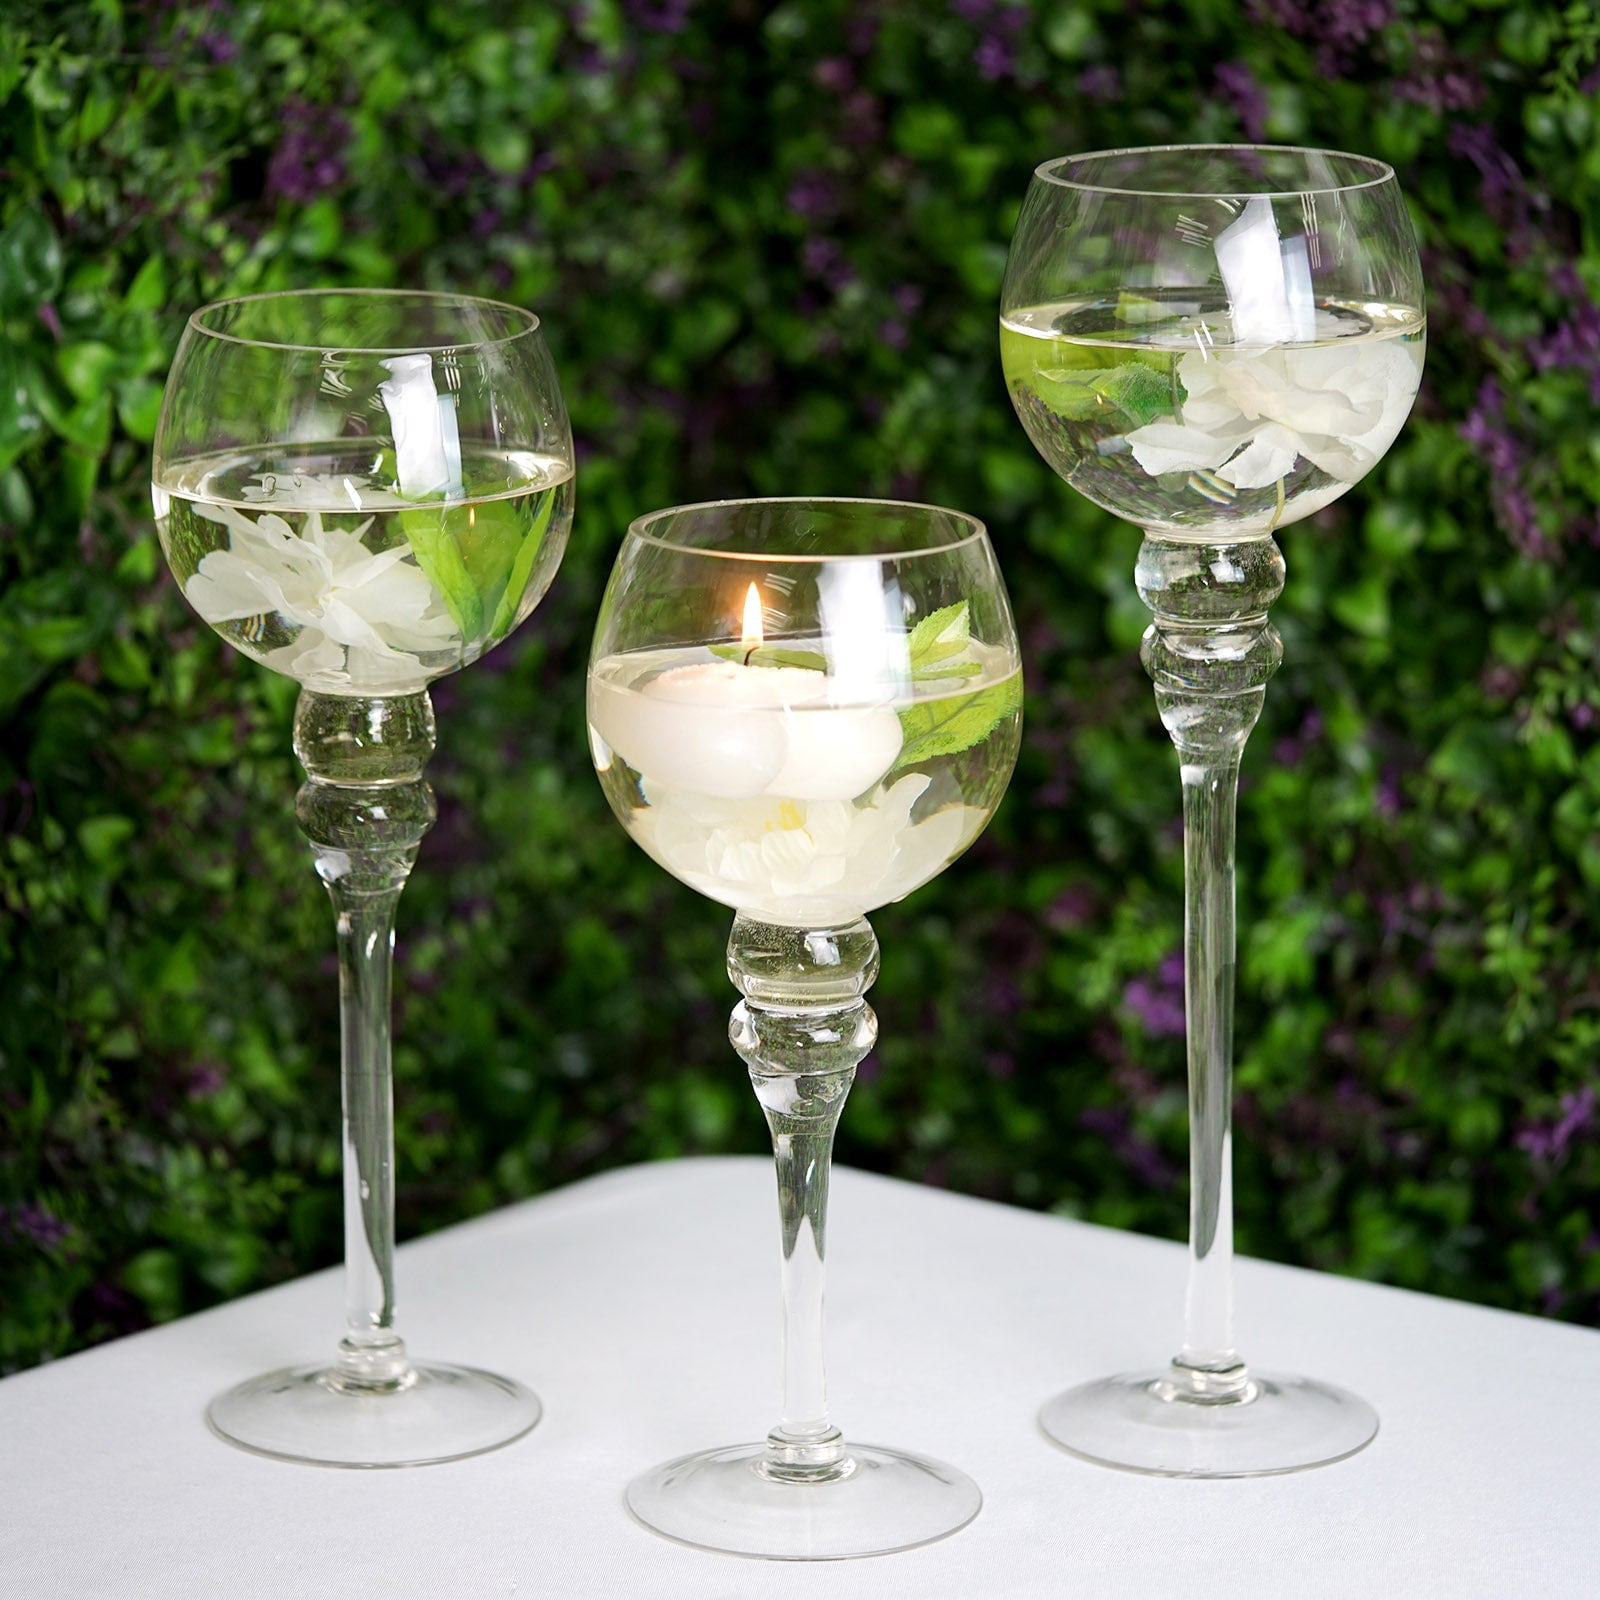 3SETS of 3Piece Cylinder Vases Wedding Glass Table Centerpiece Candle holders 